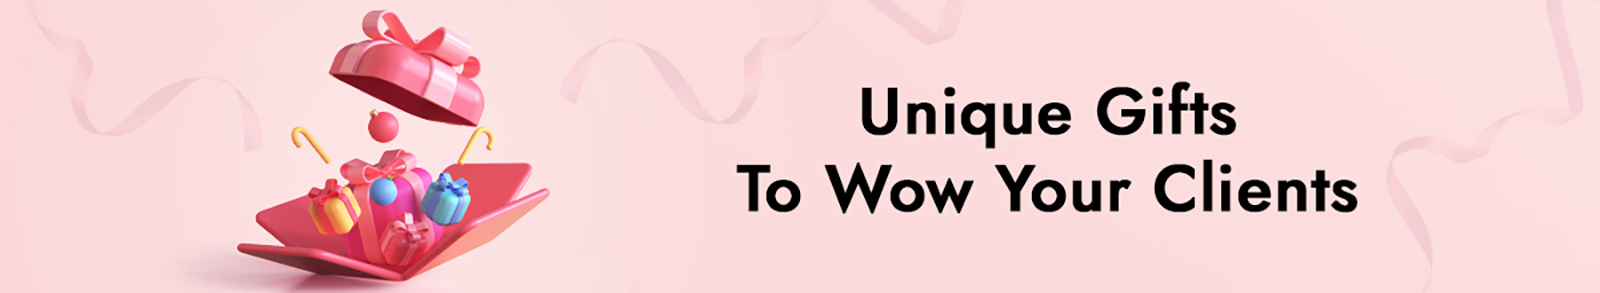 Unique-Gifts-To-Wow-Your-Clients